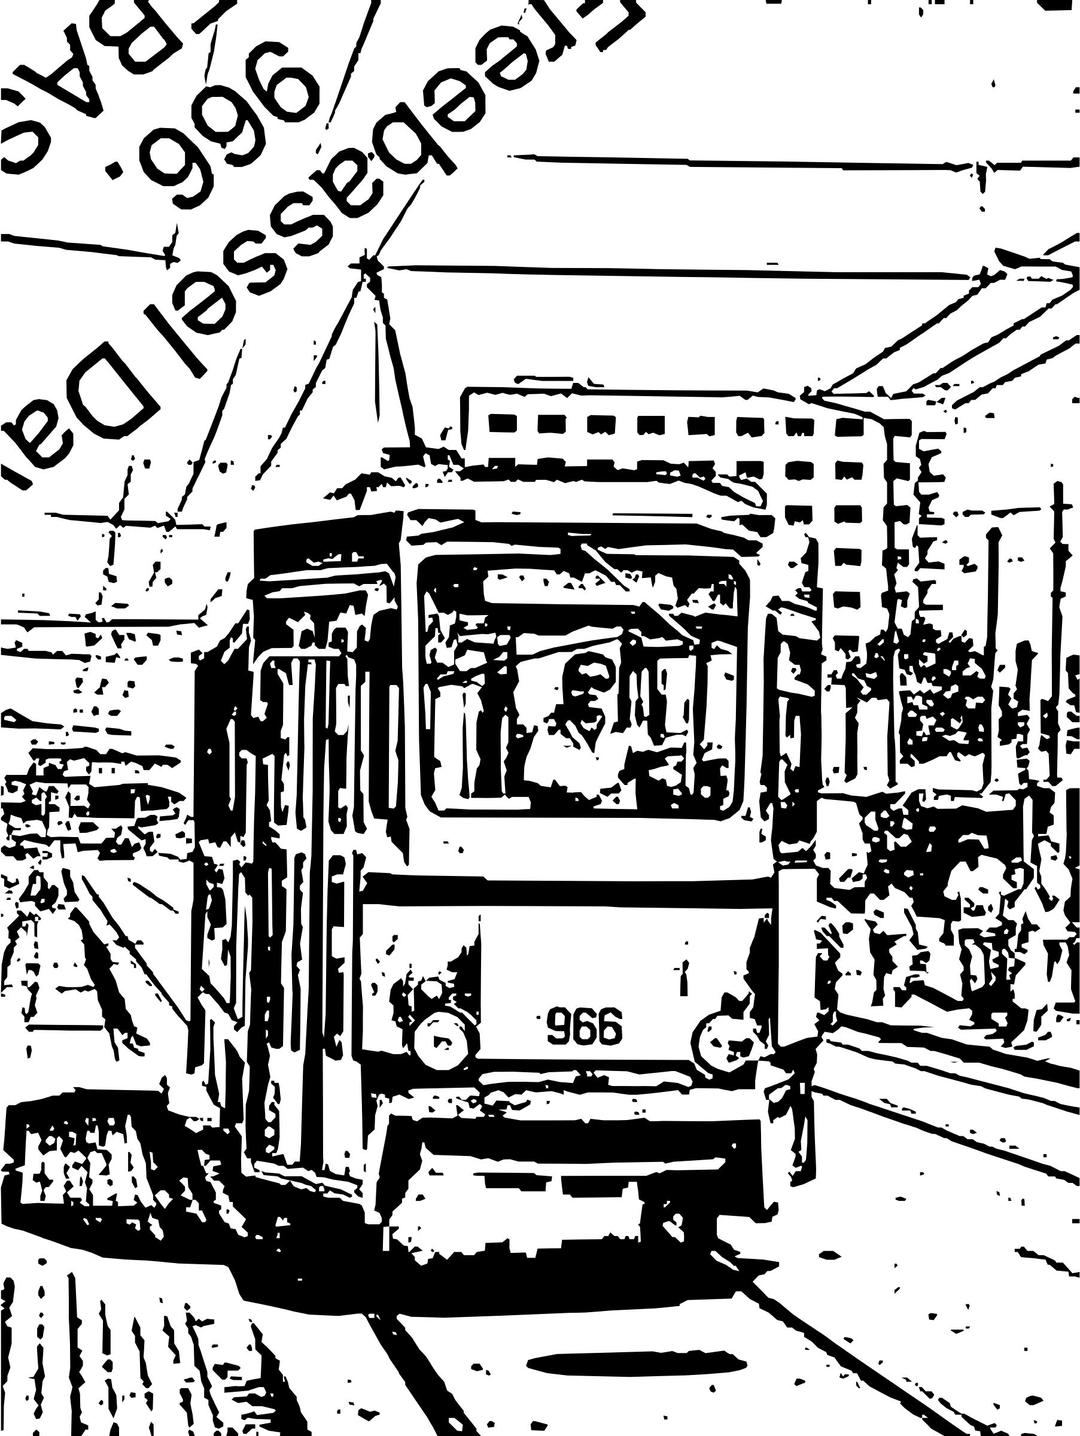 Freebassel Day 966 Ride the Train png transparent